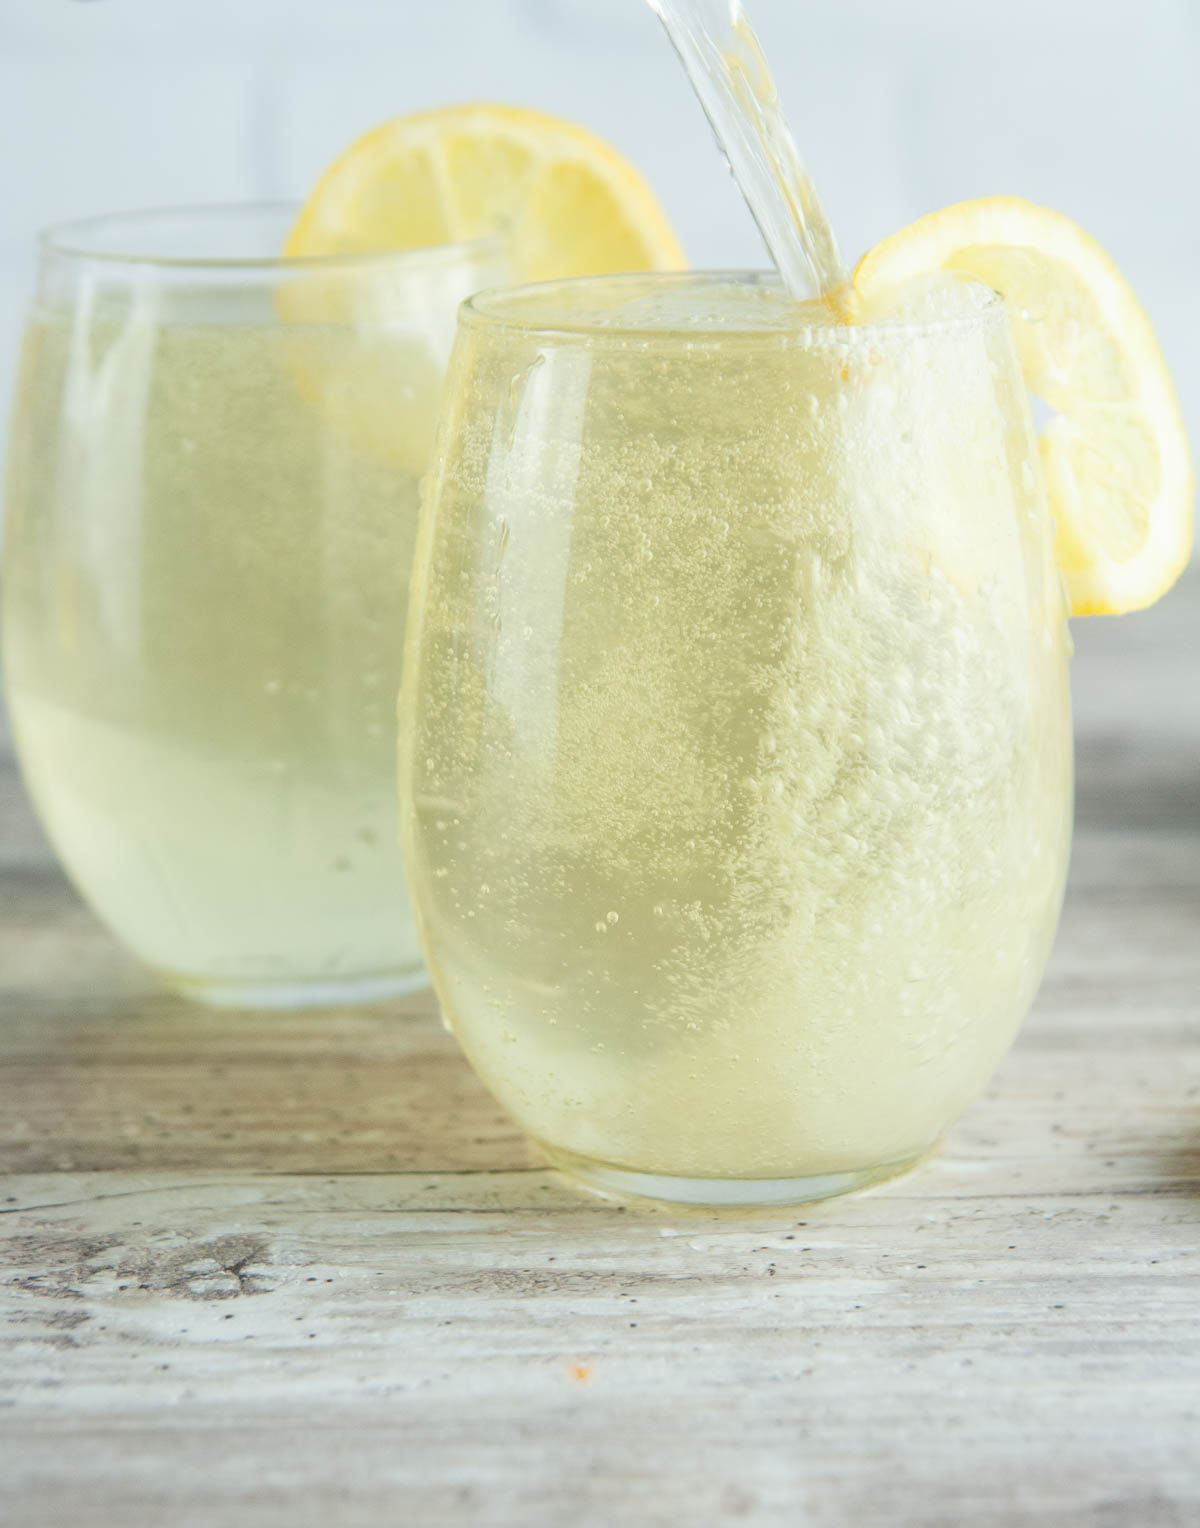 Top the limoncello spritz with a little extra prosecco if desired!